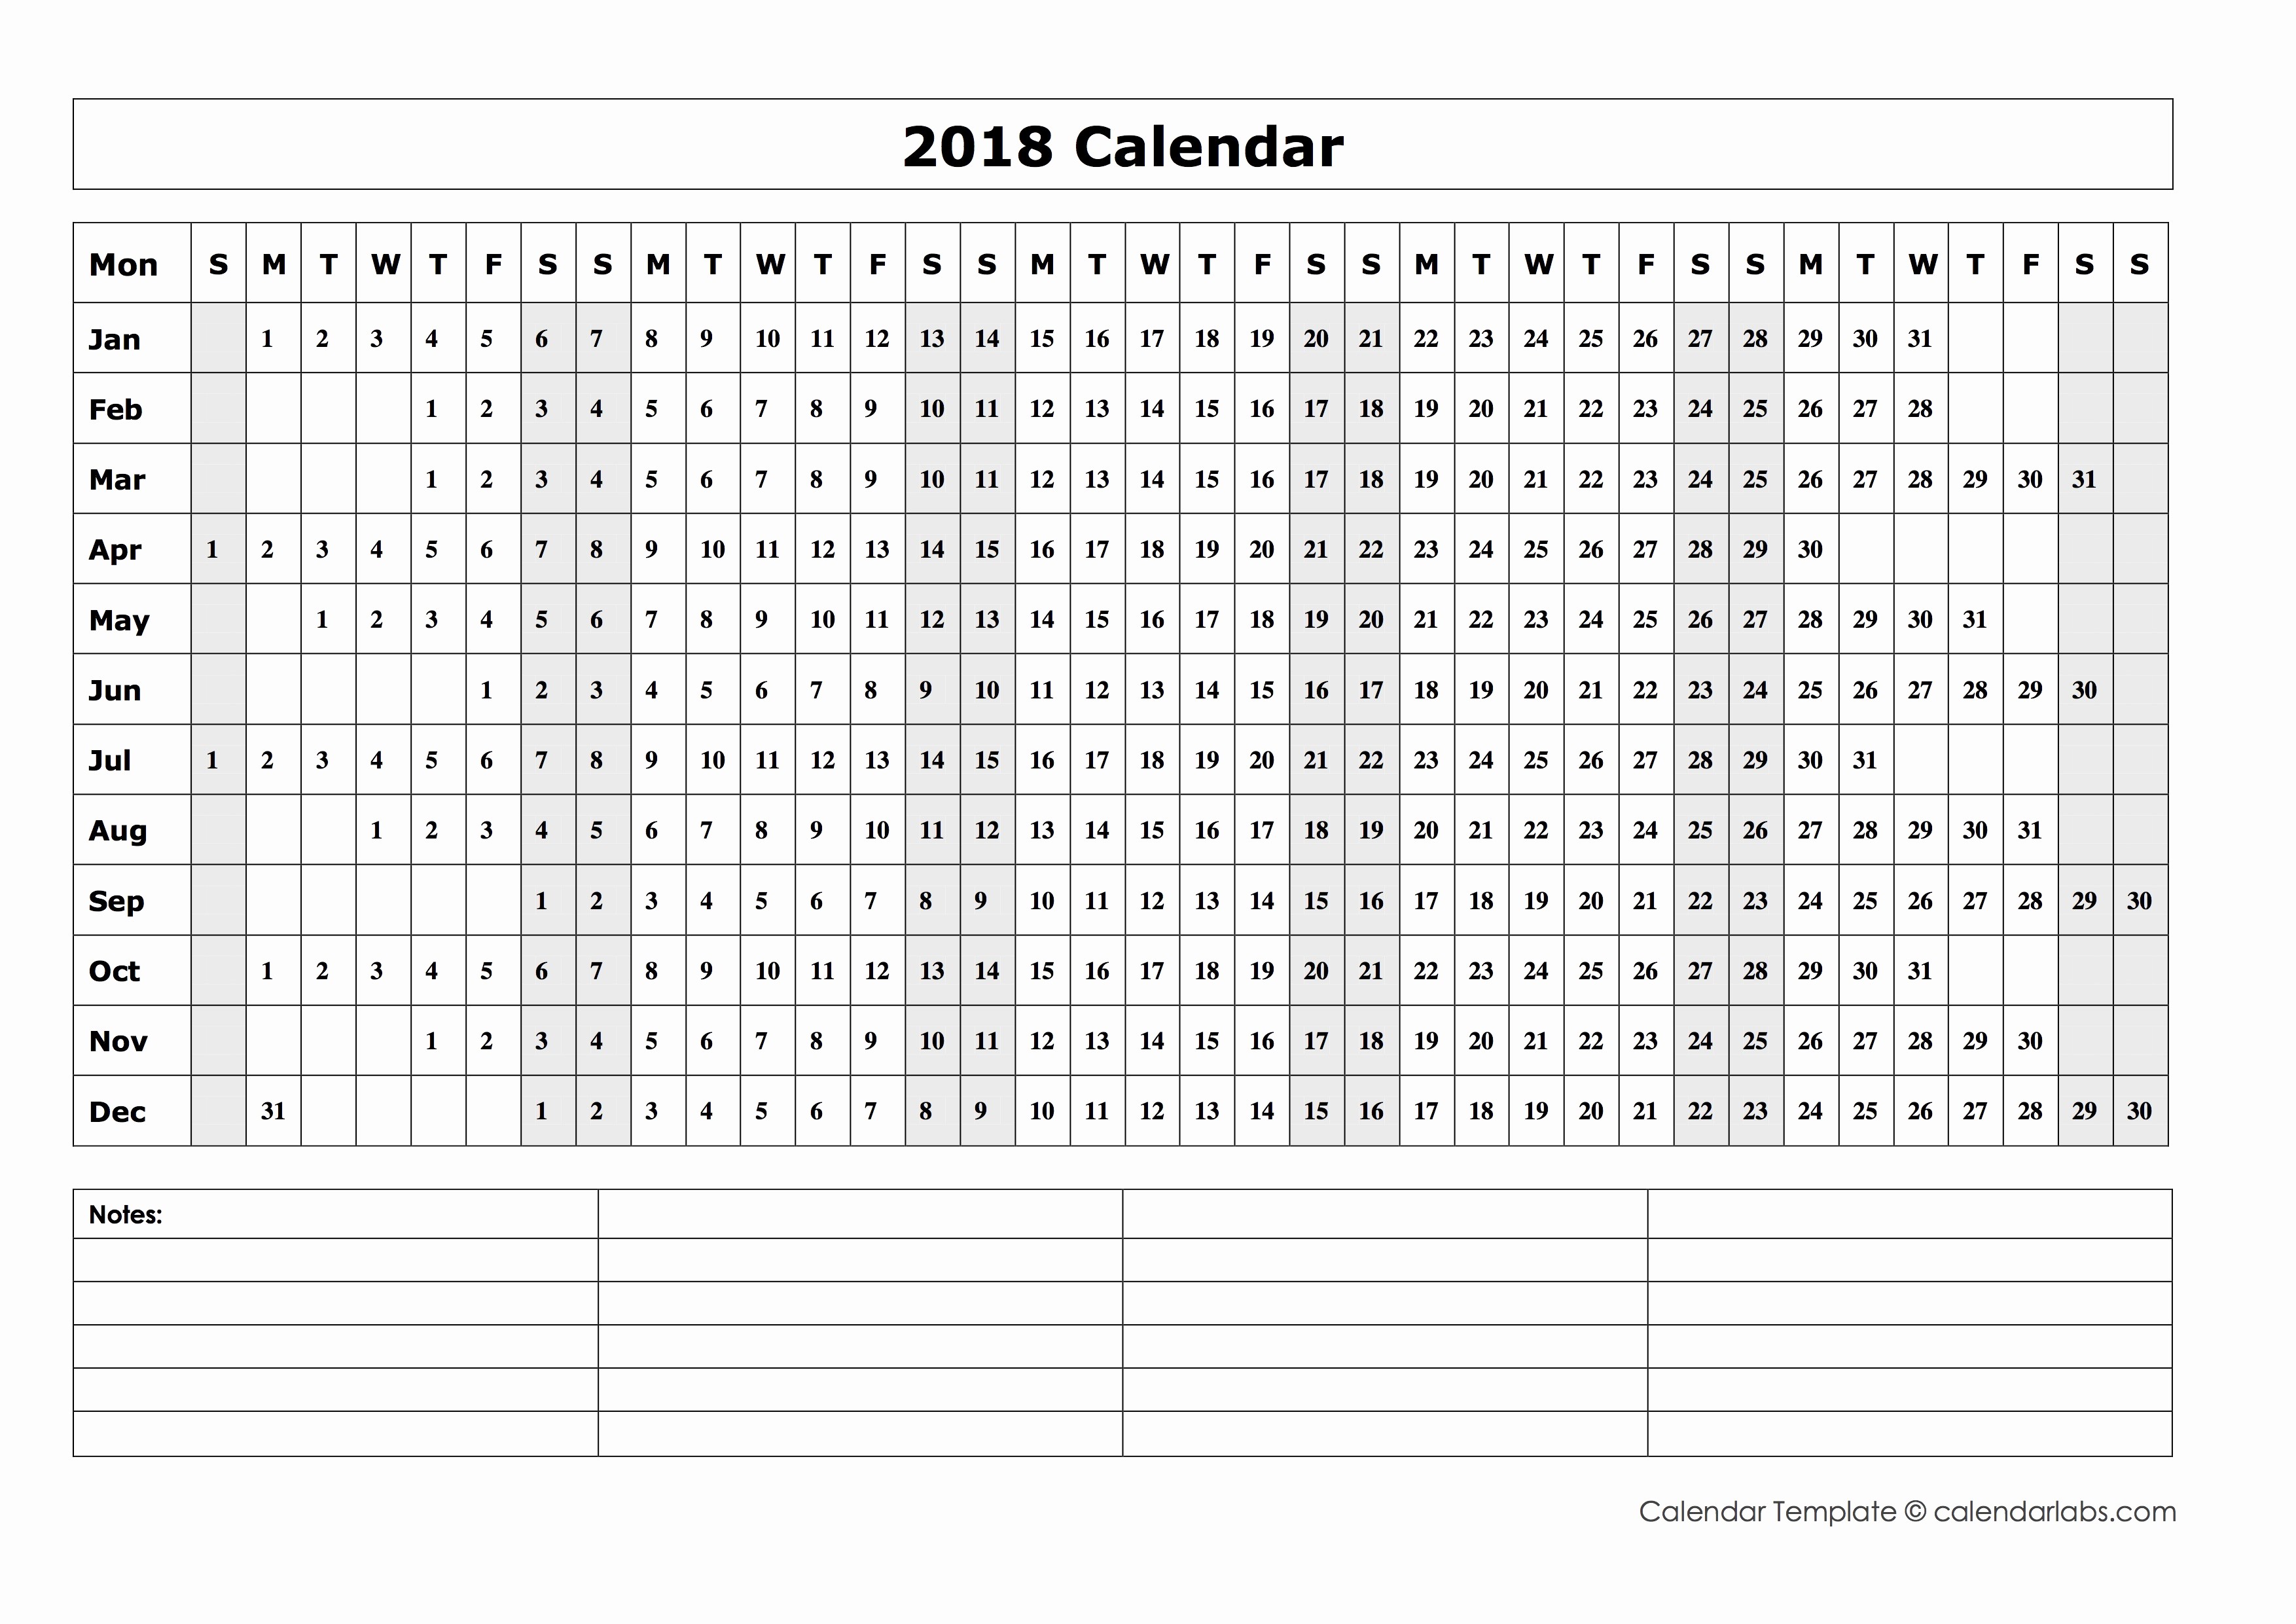 A Year at A Glance Luxury 2018 Blank Year at A Glance Calendar Free Printable